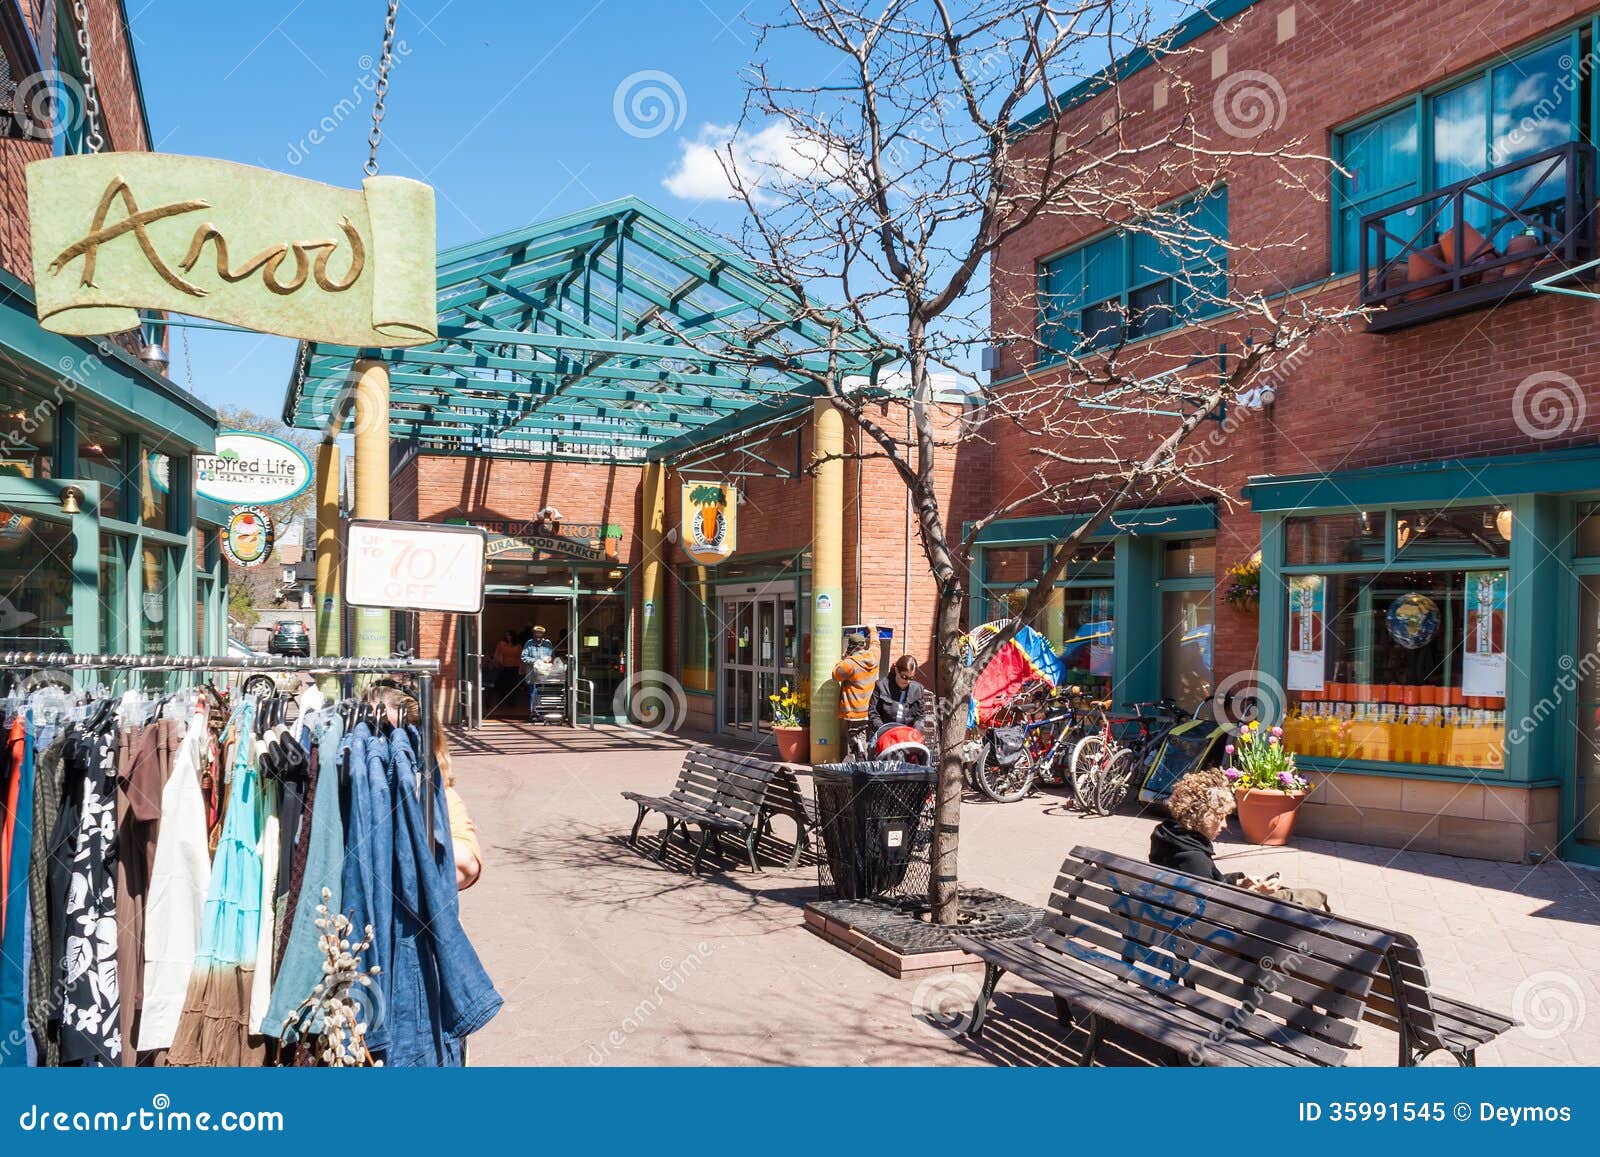 Houses And Shops In Greektown In Toronto Editorial Image - Image: 35991545